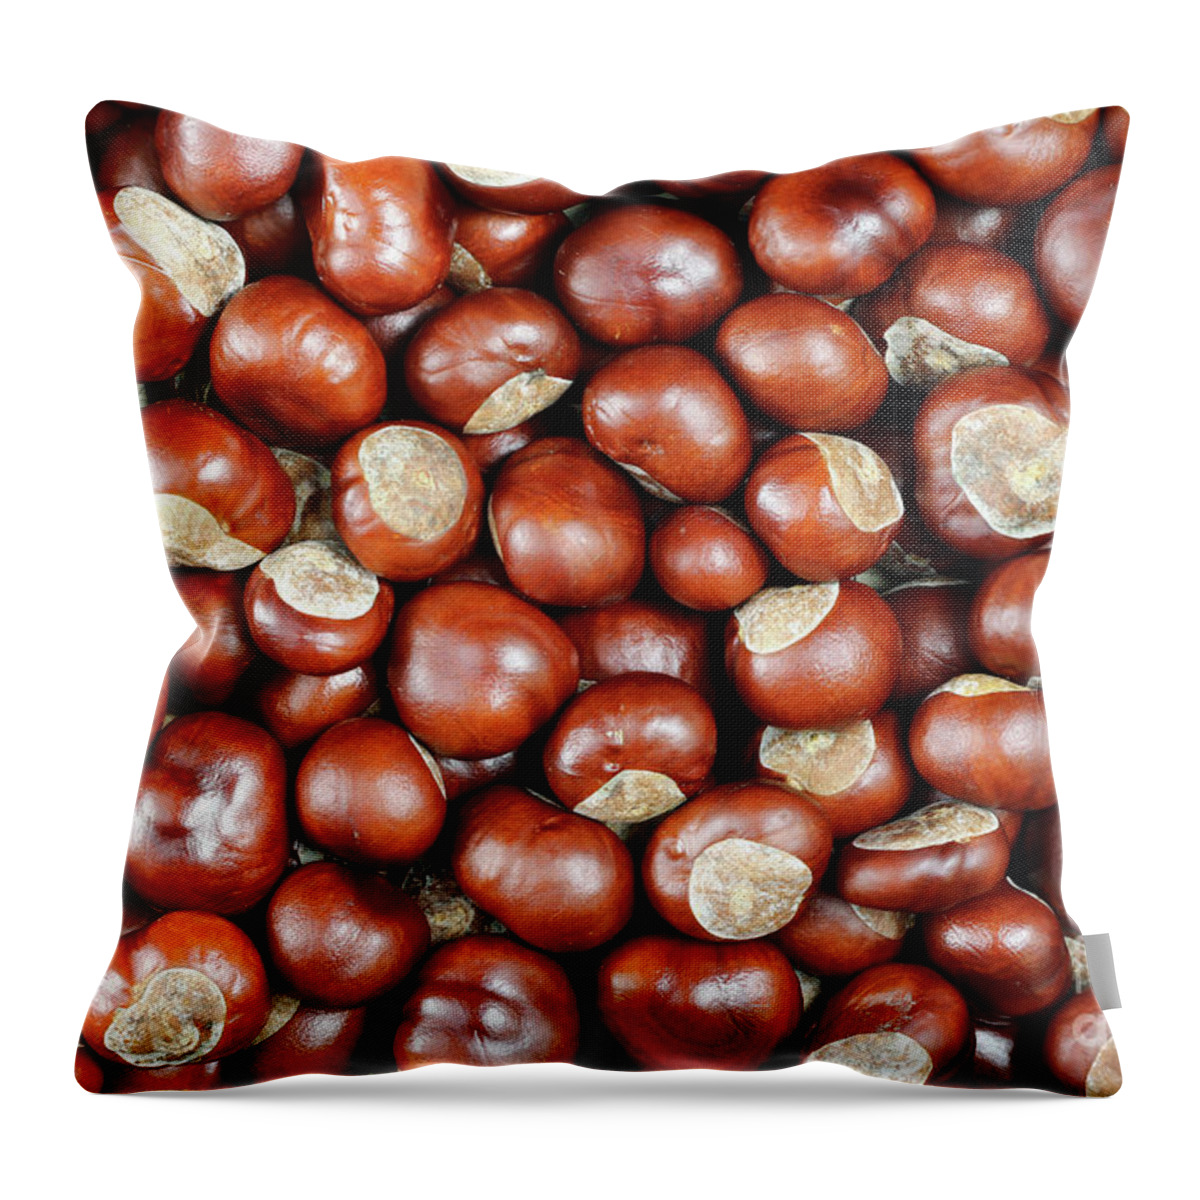 Conker Throw Pillow featuring the photograph Conkers by Michal Boubin